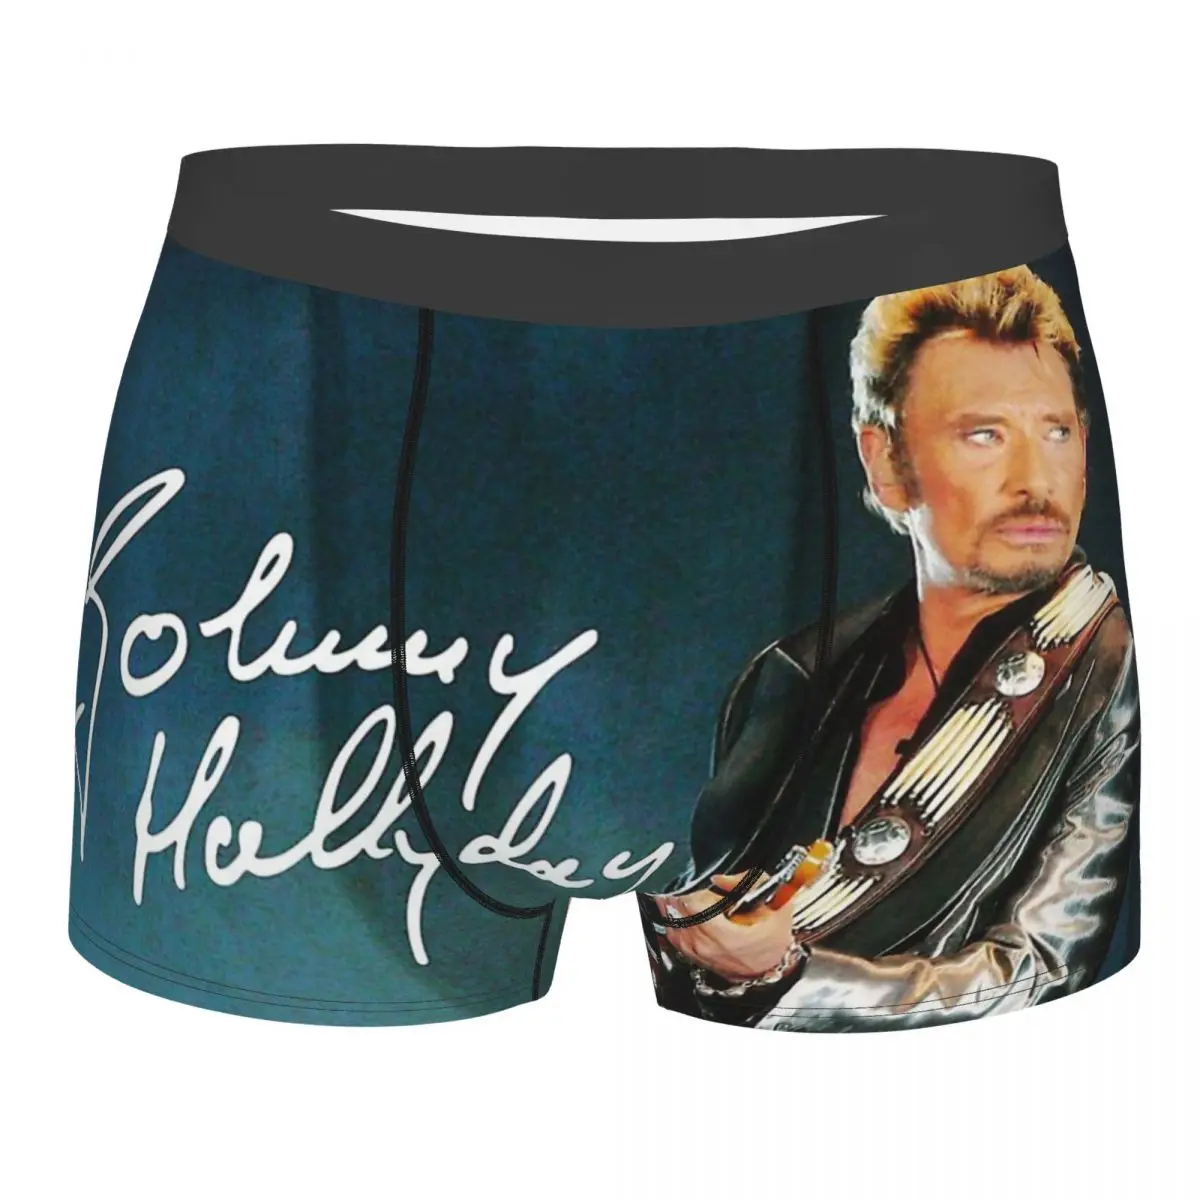 

Johnny Hallyday Rock Music French Singer Limited Access Underpants Homme Panties Men's Underwear Ventilate Shorts Boxer Briefs